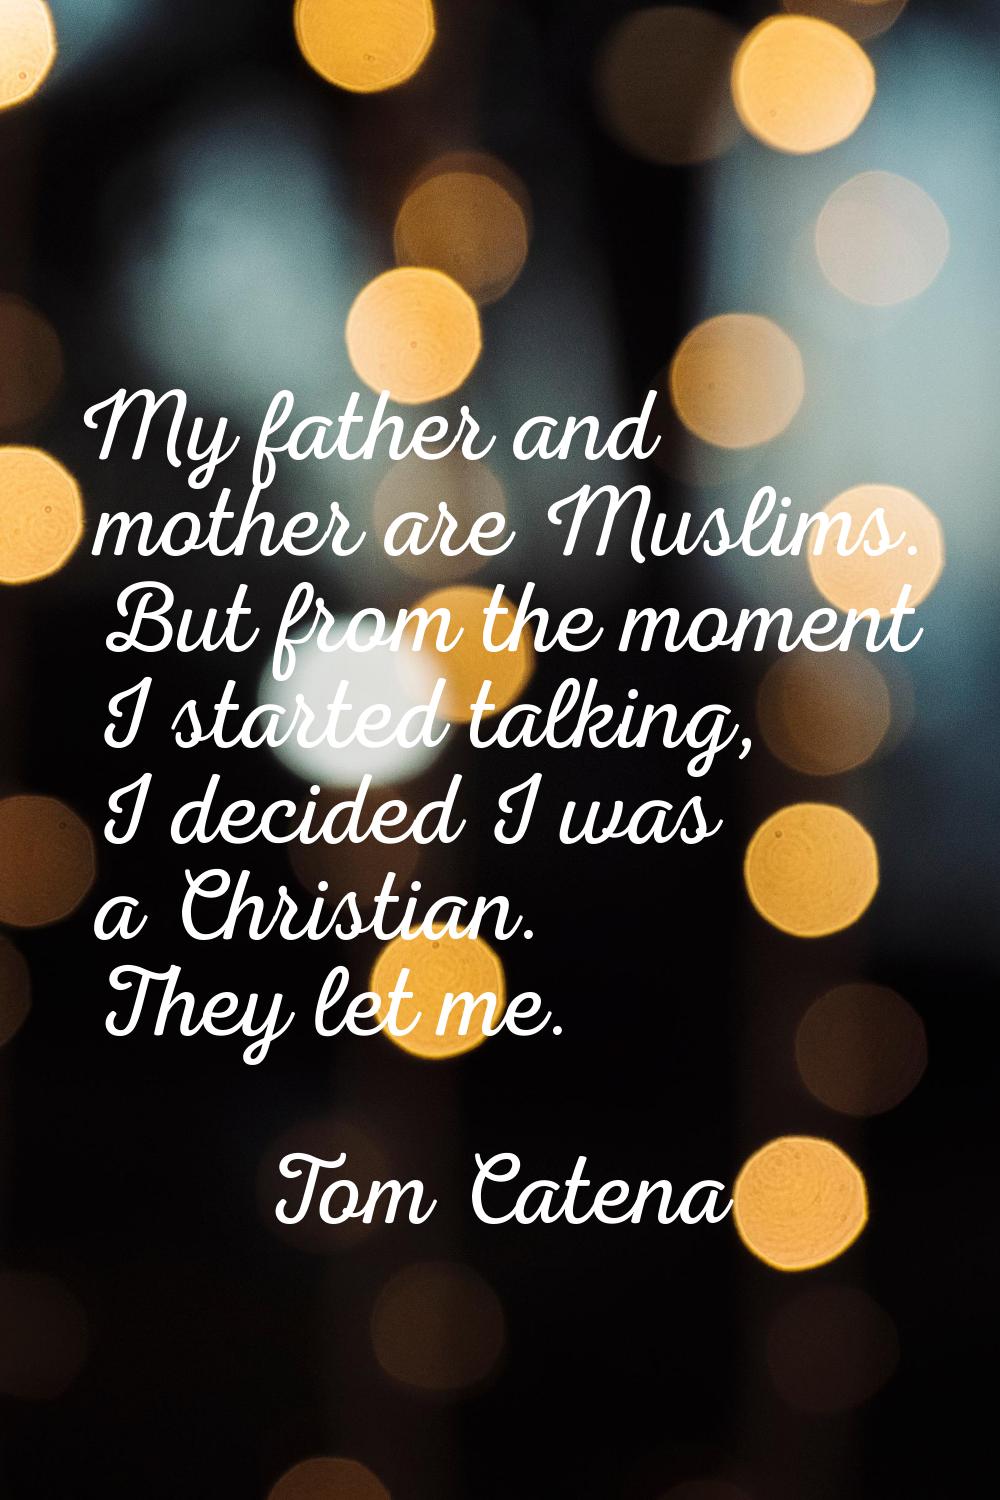 My father and mother are Muslims. But from the moment I started talking, I decided I was a Christia